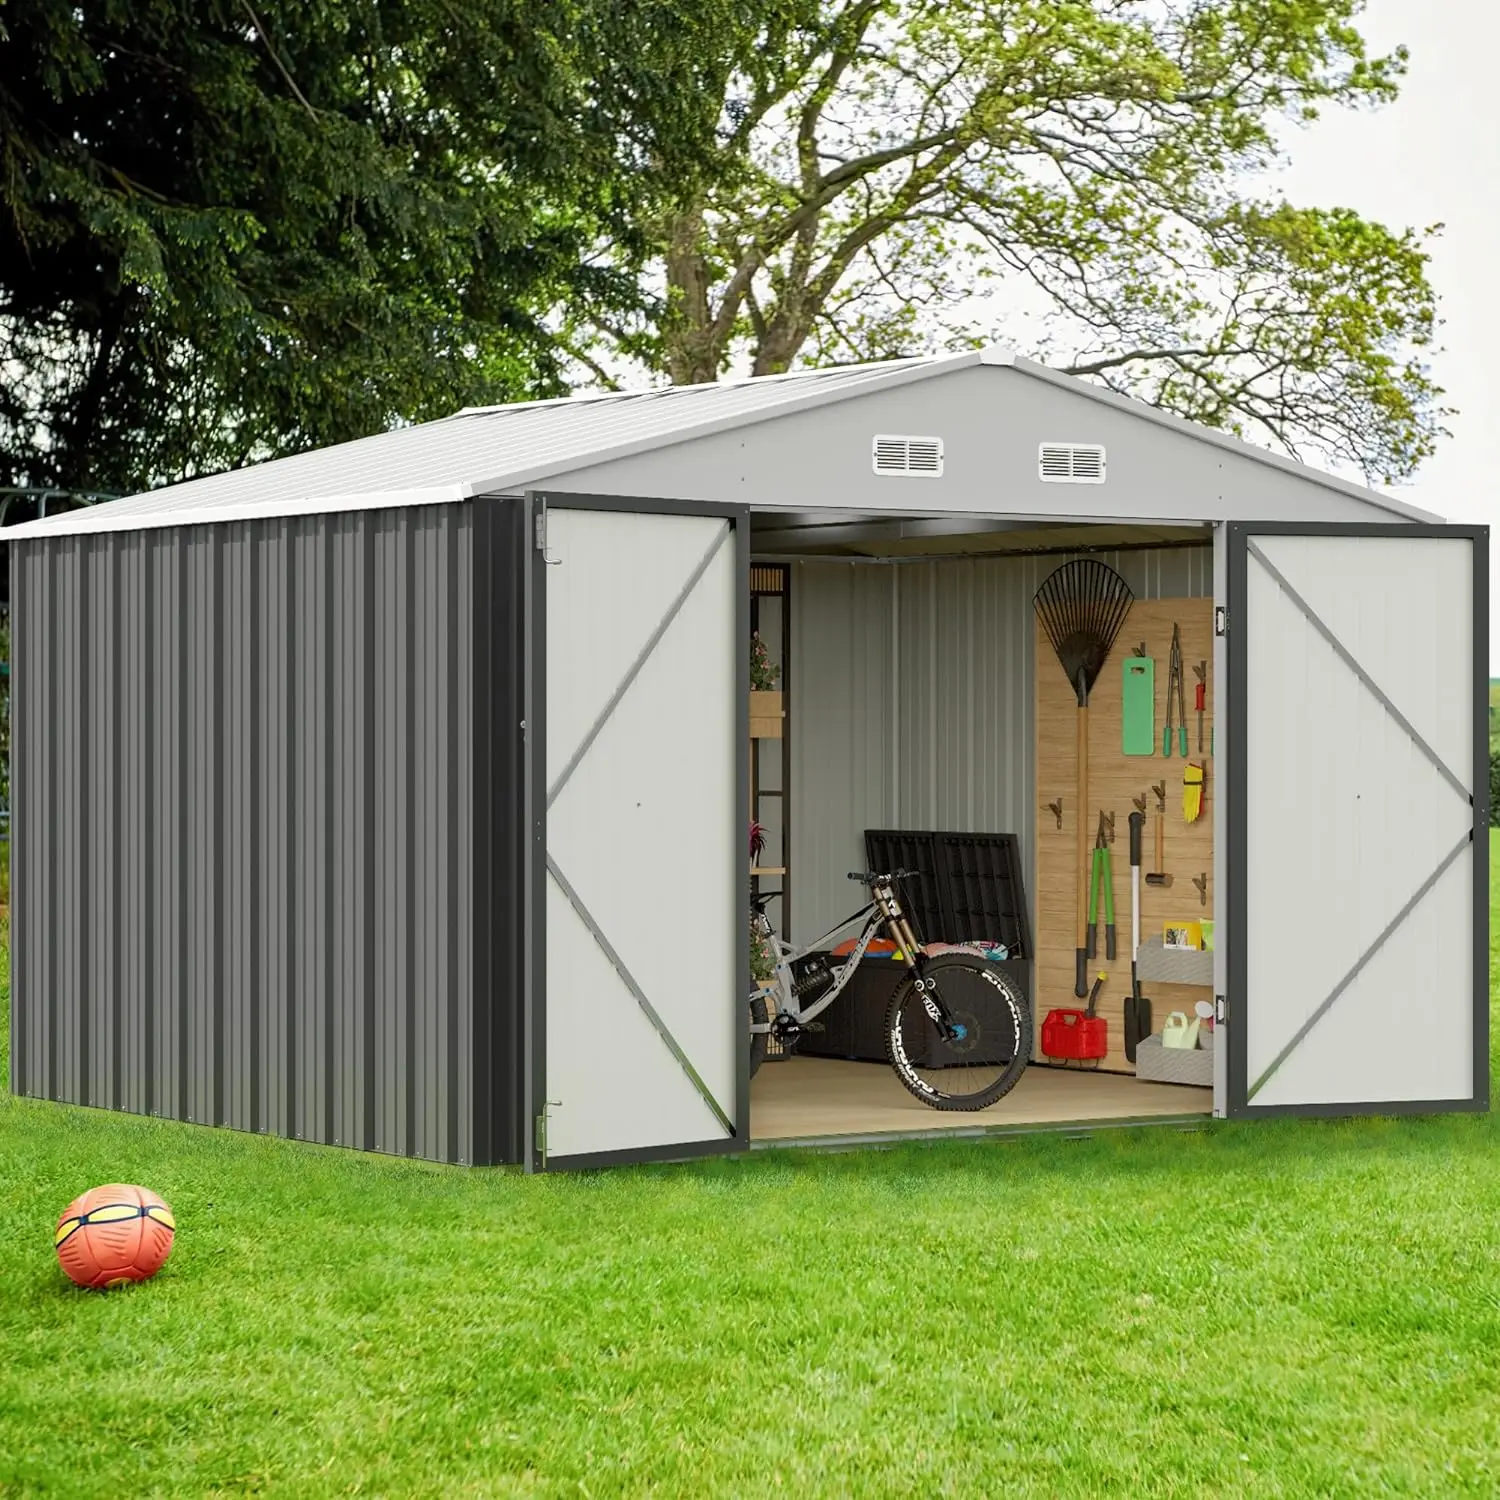 

10 x 8 FT Shed Outdoor Storage Metal Garden Shed with Lockable Door Outside Waterproof Tool Shed for Backyard, Patio,Gray